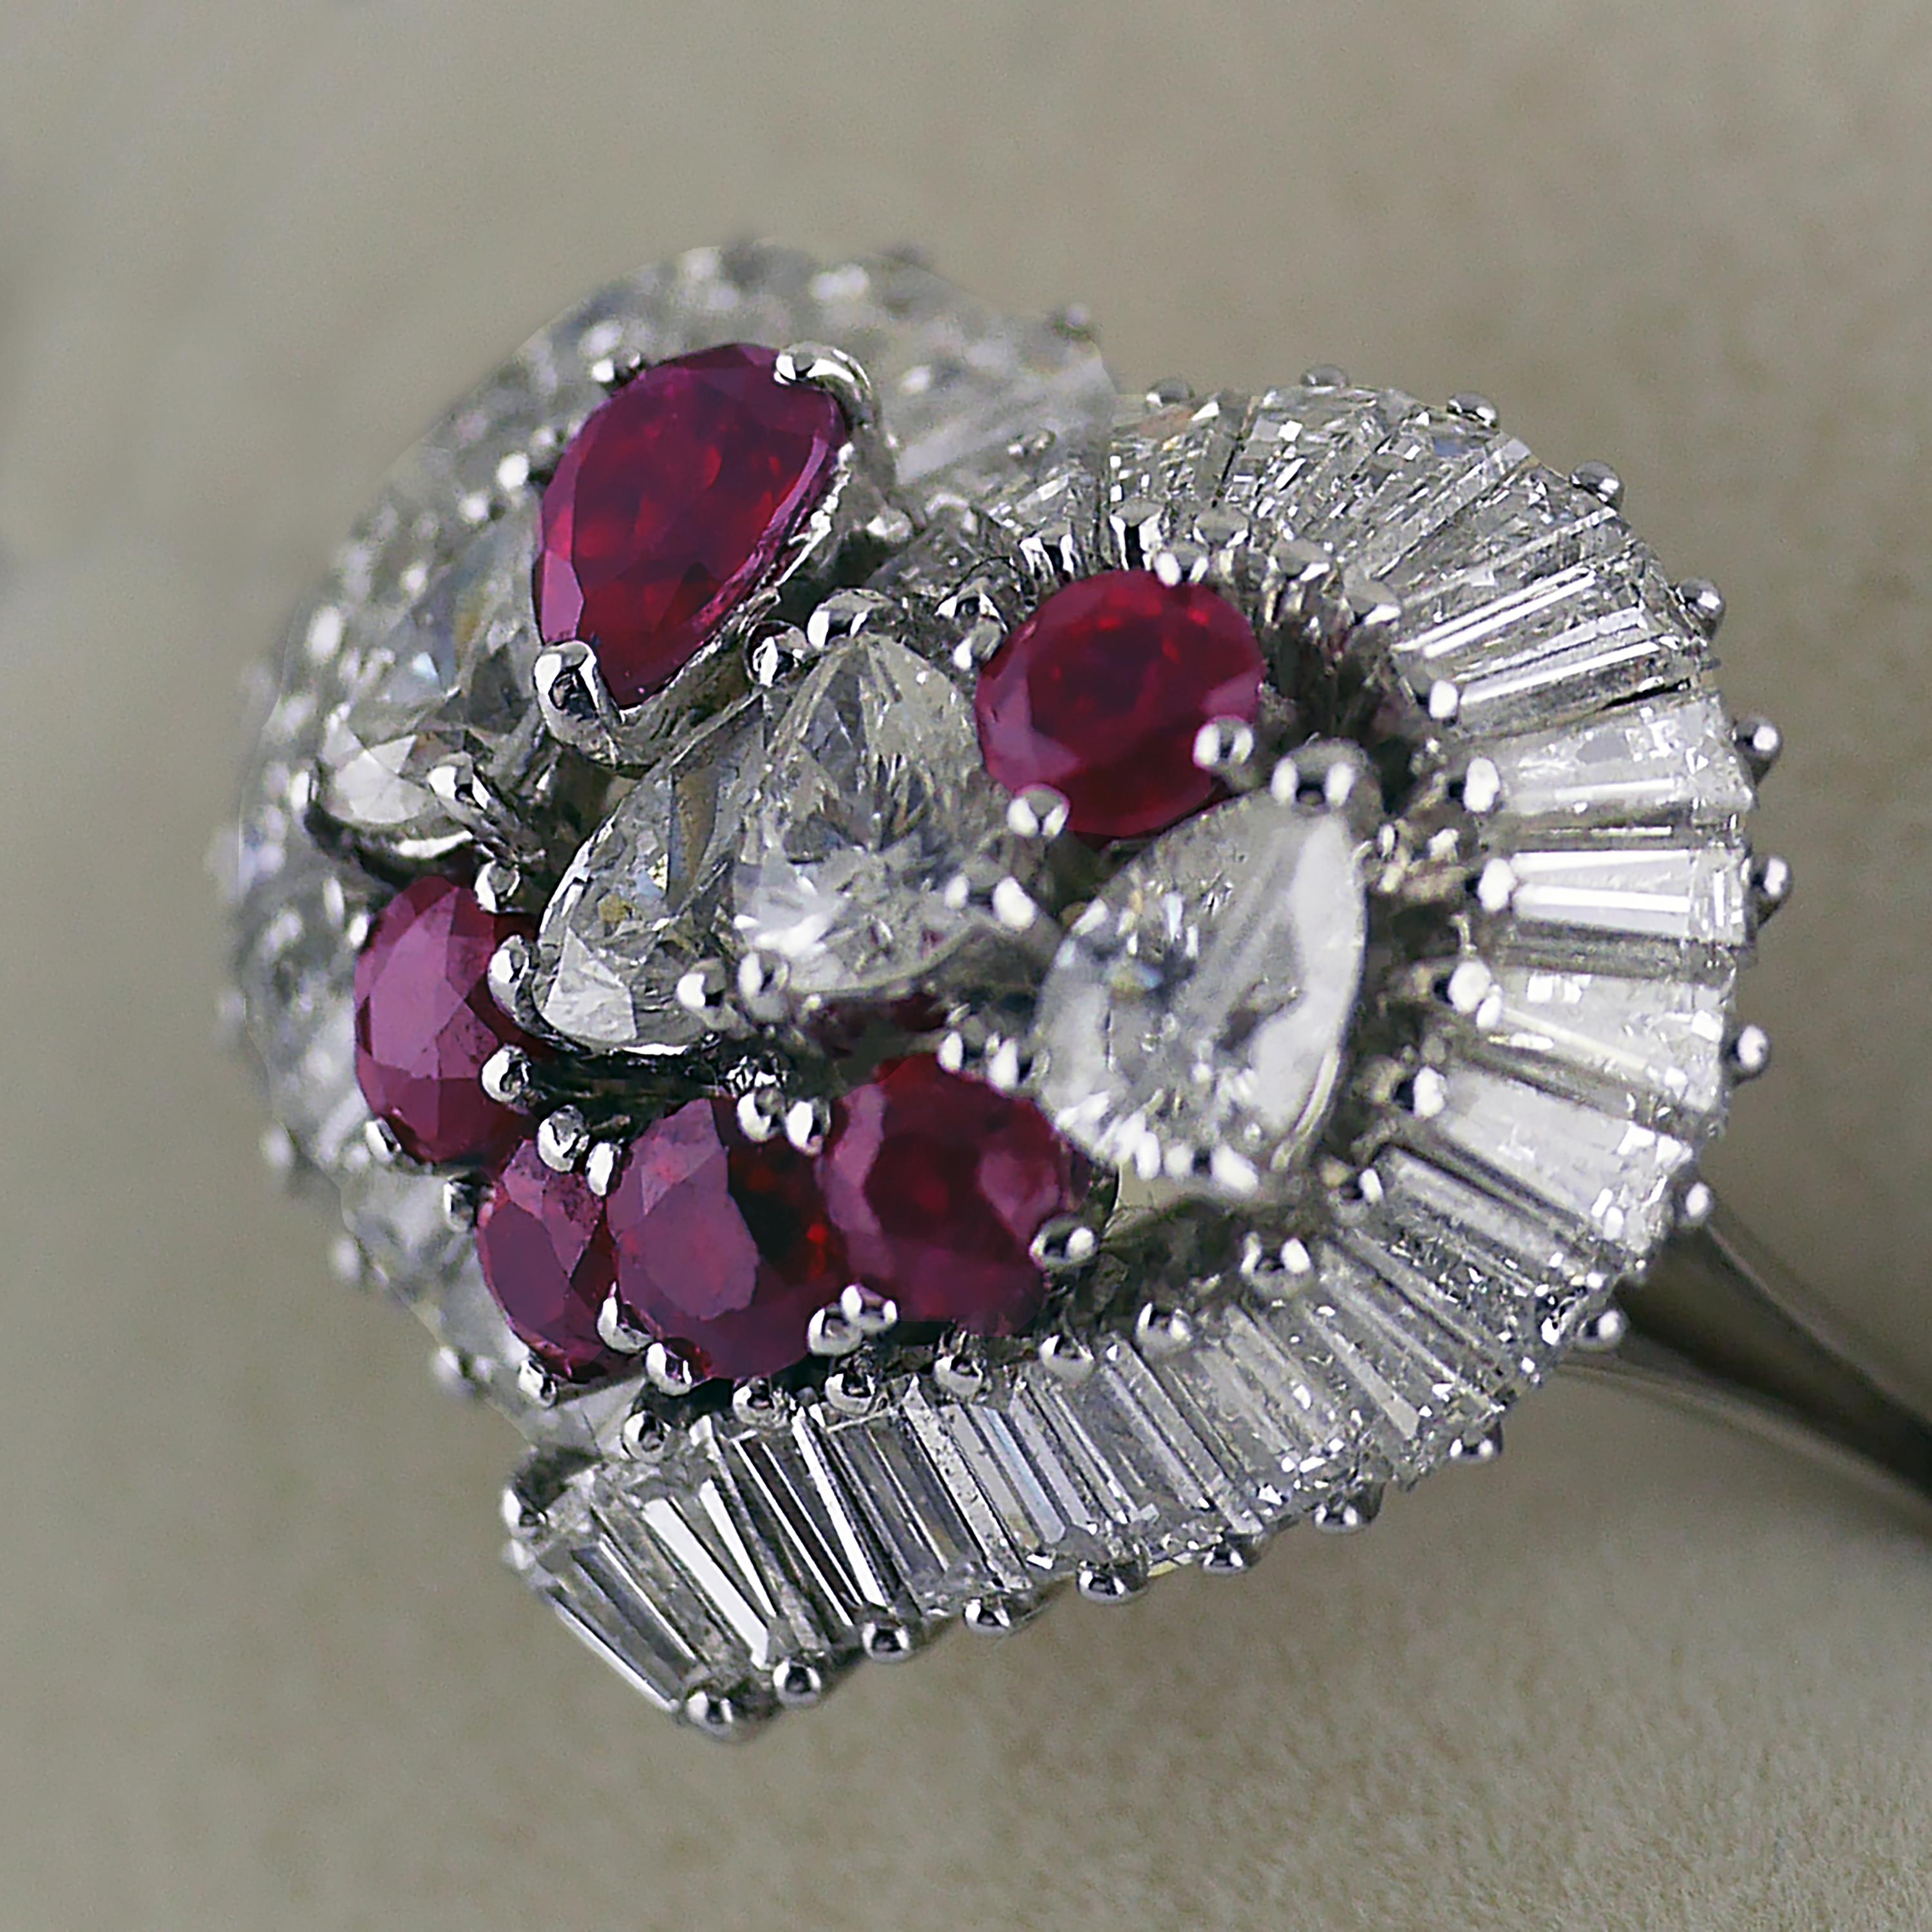 Vintage heart shaped ring with fine and lively natural untreated “Pidgeon Blood” Rubies and diamonds, made in 1975 with London hall mark.

6 well matched “Pidgeon Blood”  rubies with good colour saturation, approximately 1.0ct (Total)

The rubies